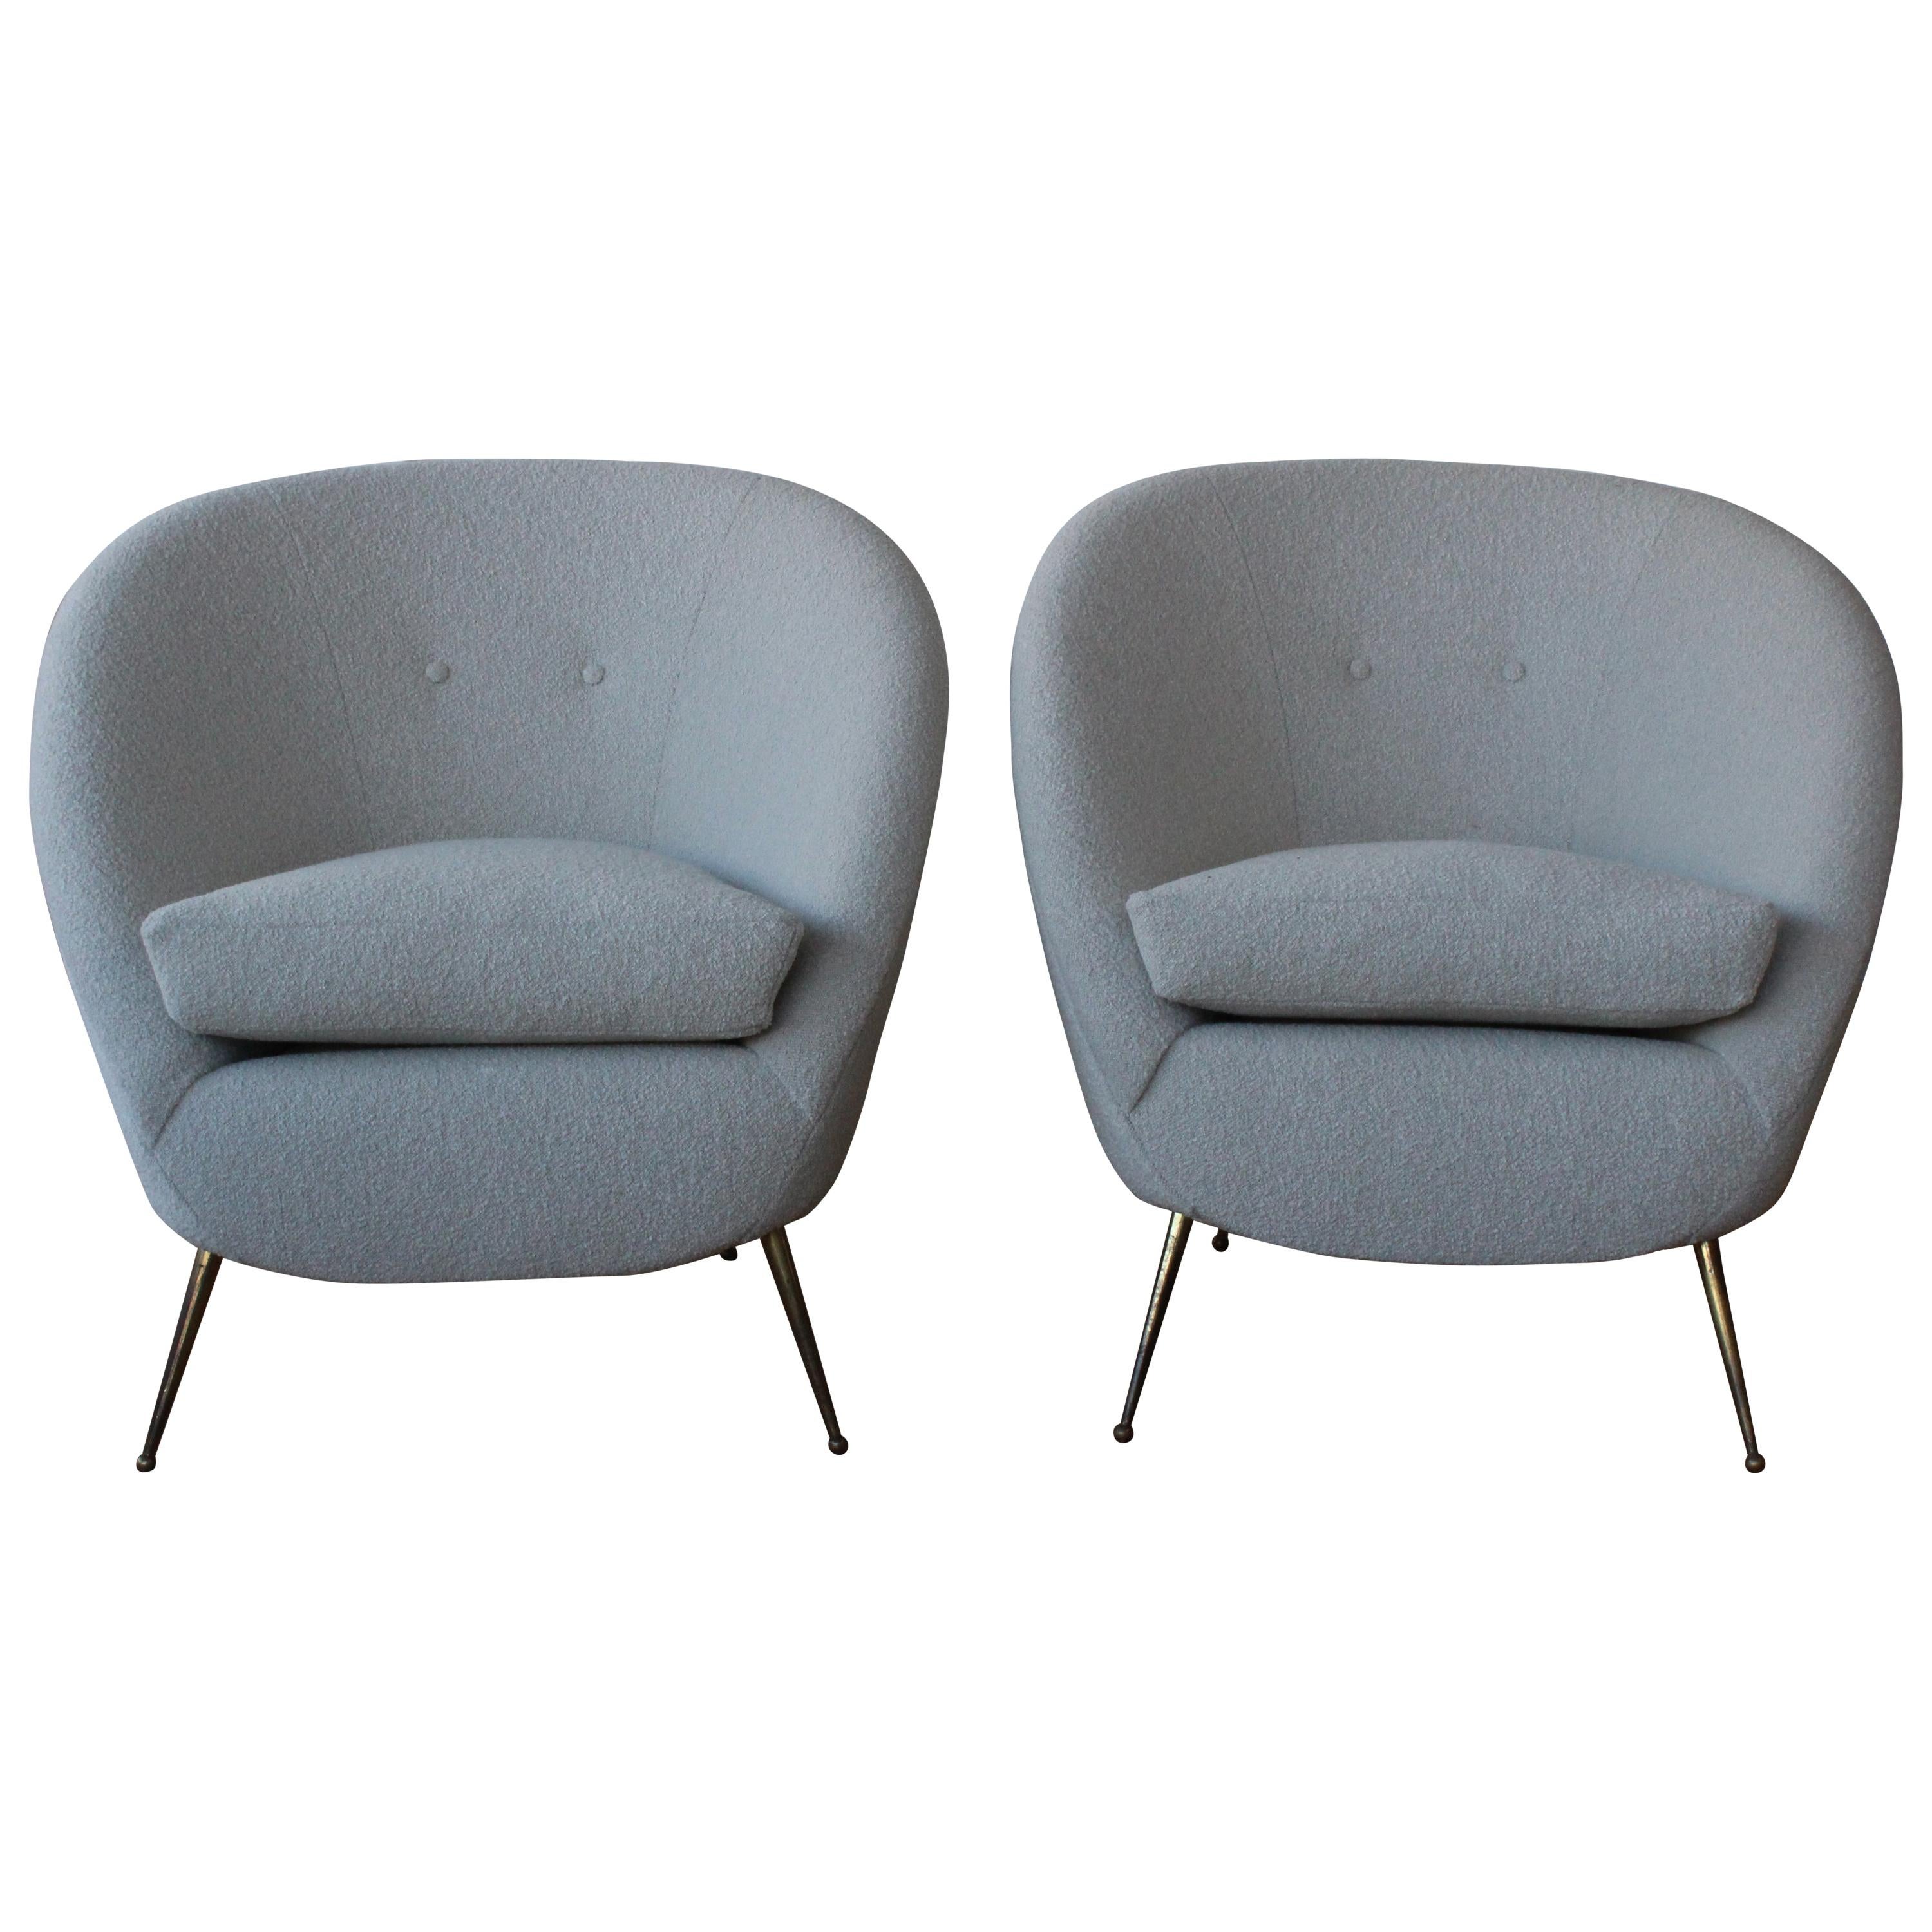 Pair of Bouclé Lounge Chairs, Italy, 1950s